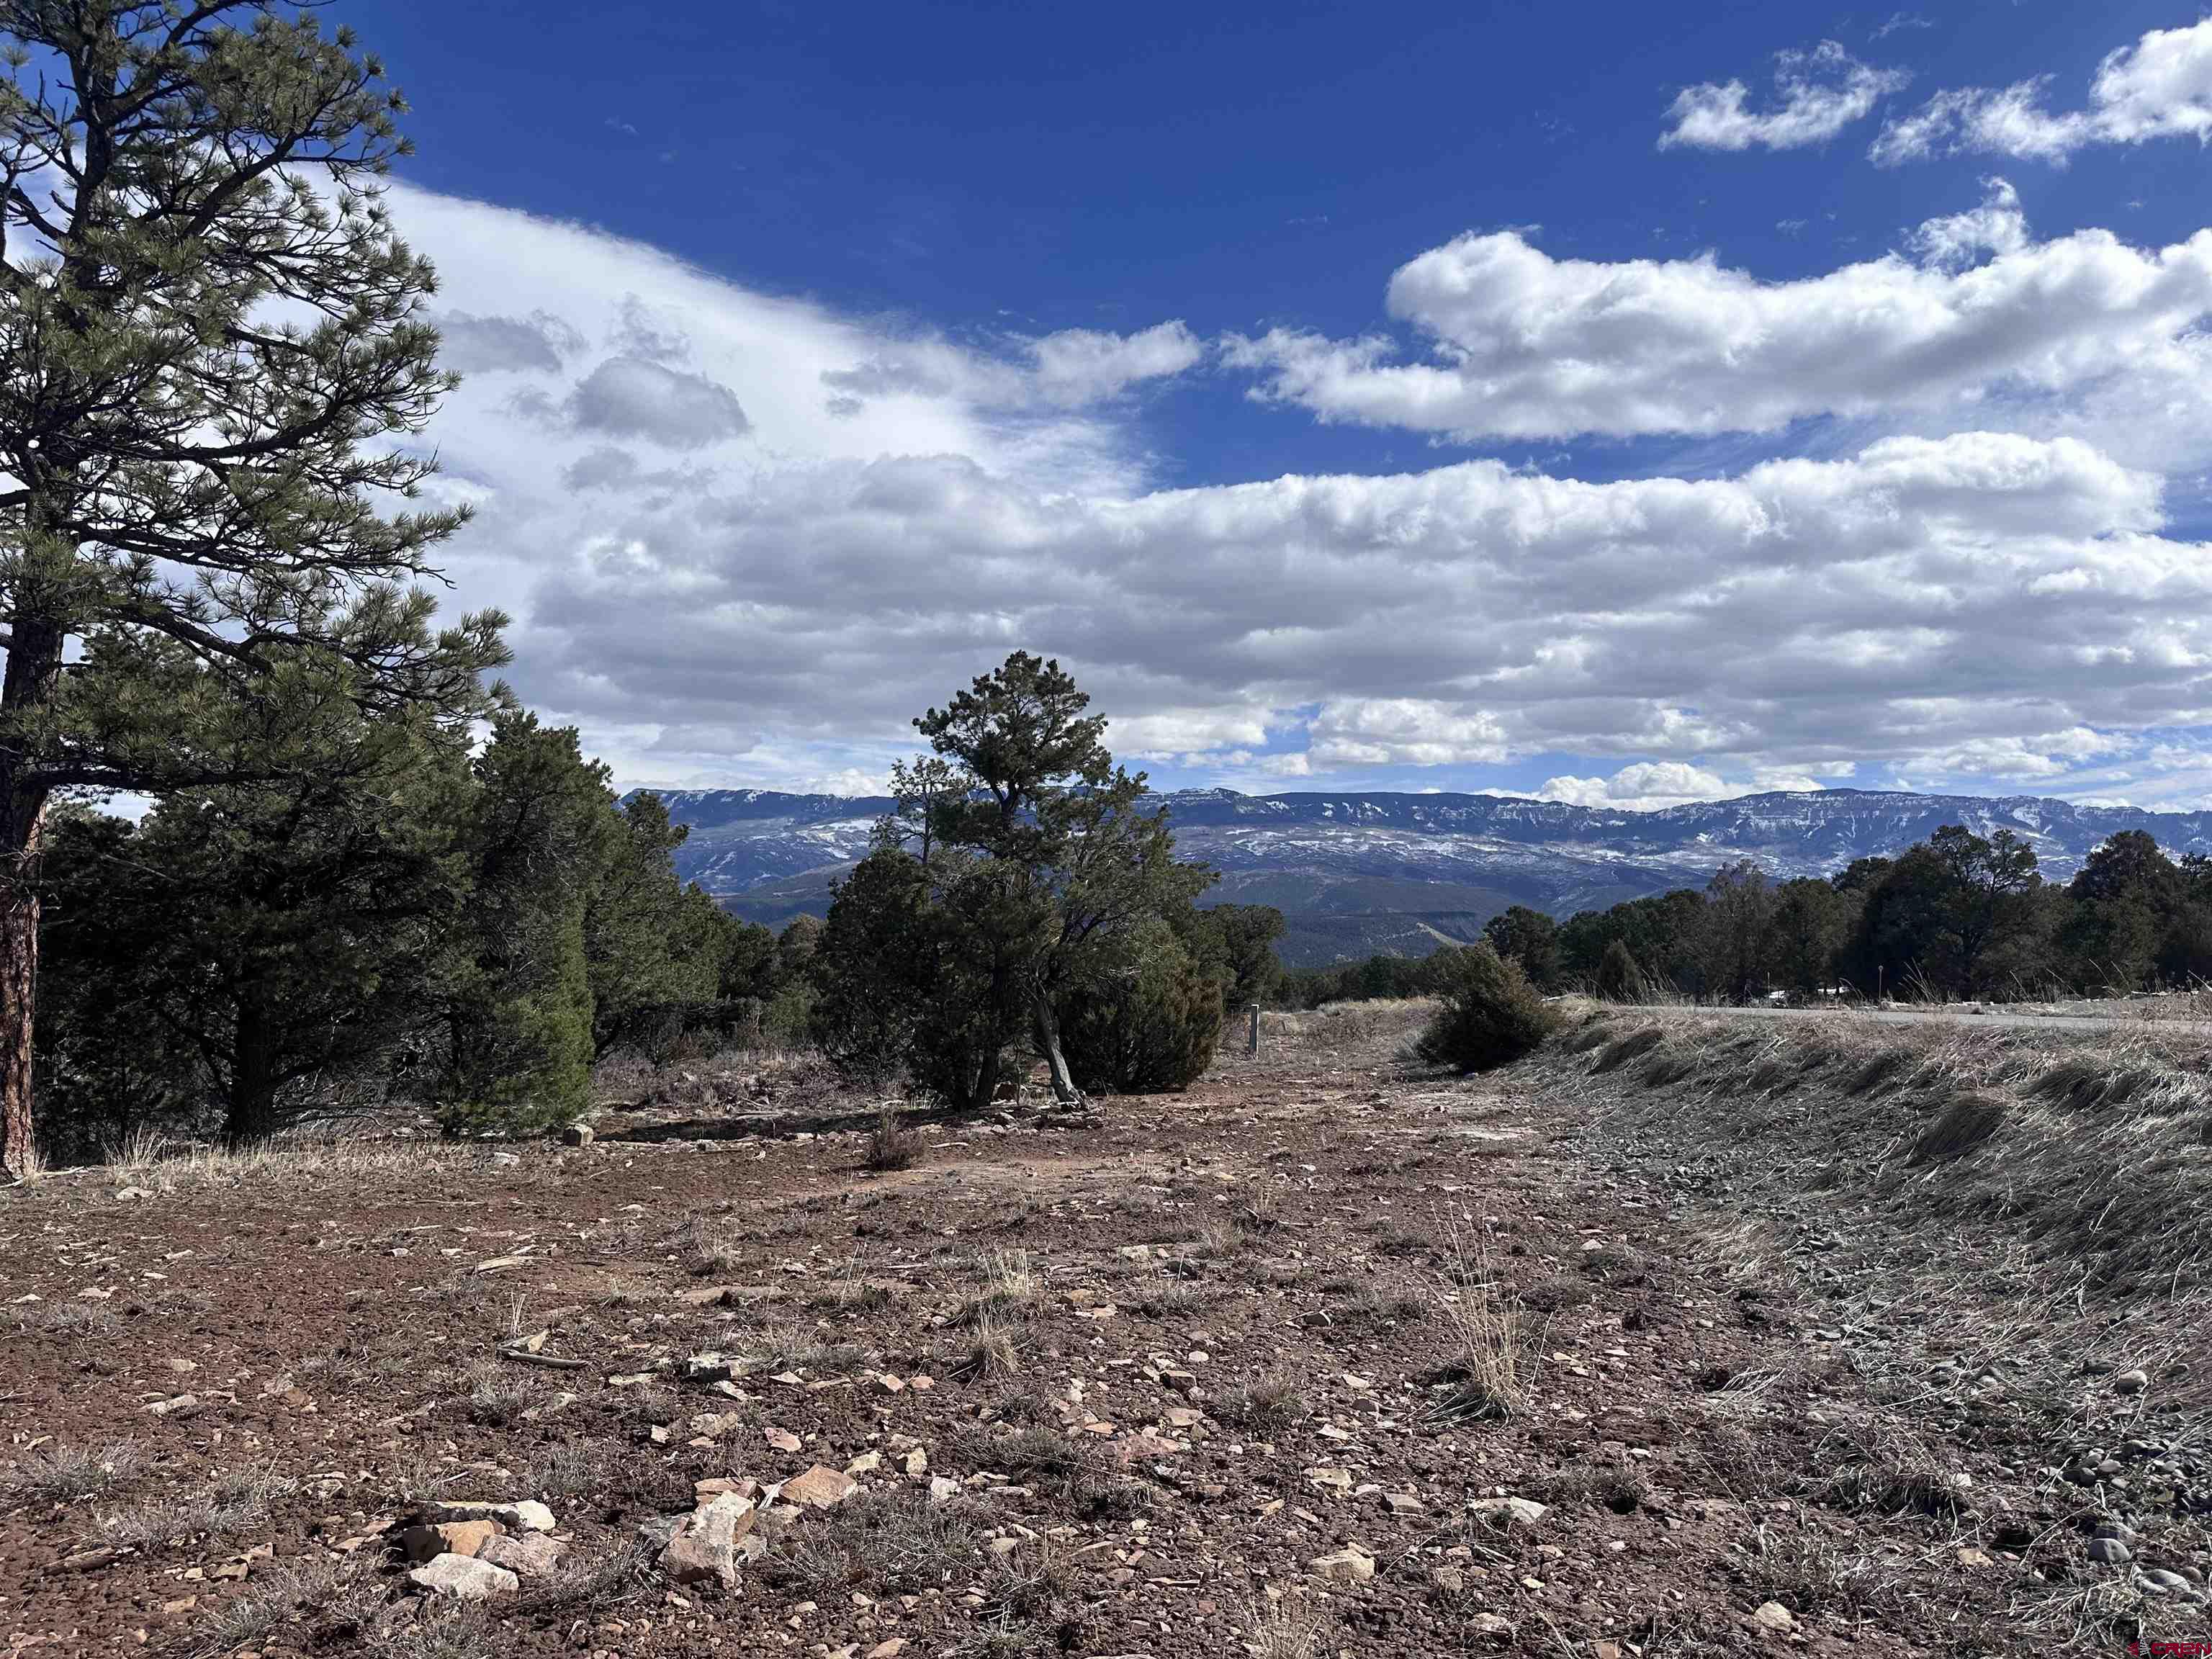 Not too big - not too small - this one is just right!  2+ acres on Loghill Mesa waiting for your home.  It's time to realize your dream of living in southwestern Colorado.  Owner financing is available here - contact me for the details!!  This parcel includes a PAID Dallas Creek water tap, with fiber internet, natural gas and electricity lines to property.  Now let's talk views....  The Cimarrons will take your breath away and you will love the Alpen Glow every night as the sun sets on the mountains.  Property does have a slight slope so it would be perfect for a walkout basement giving you first floor views as well as great 2nd floor views. It's the right time to start your adventure living here.  Just 15 minutes from Ridgway with the restaurants, shops and wonderful community.  30 minutes to Ouray - the Switzerland of America with the many hot springs and Box Canyon.  45 minutes to world class skiing in Telluride and just 30 minutes north to the newly expanded Montrose Regional Airport.  You will enjoy watching the wildlife wander through your property everyday.  See this one today and make it yours.